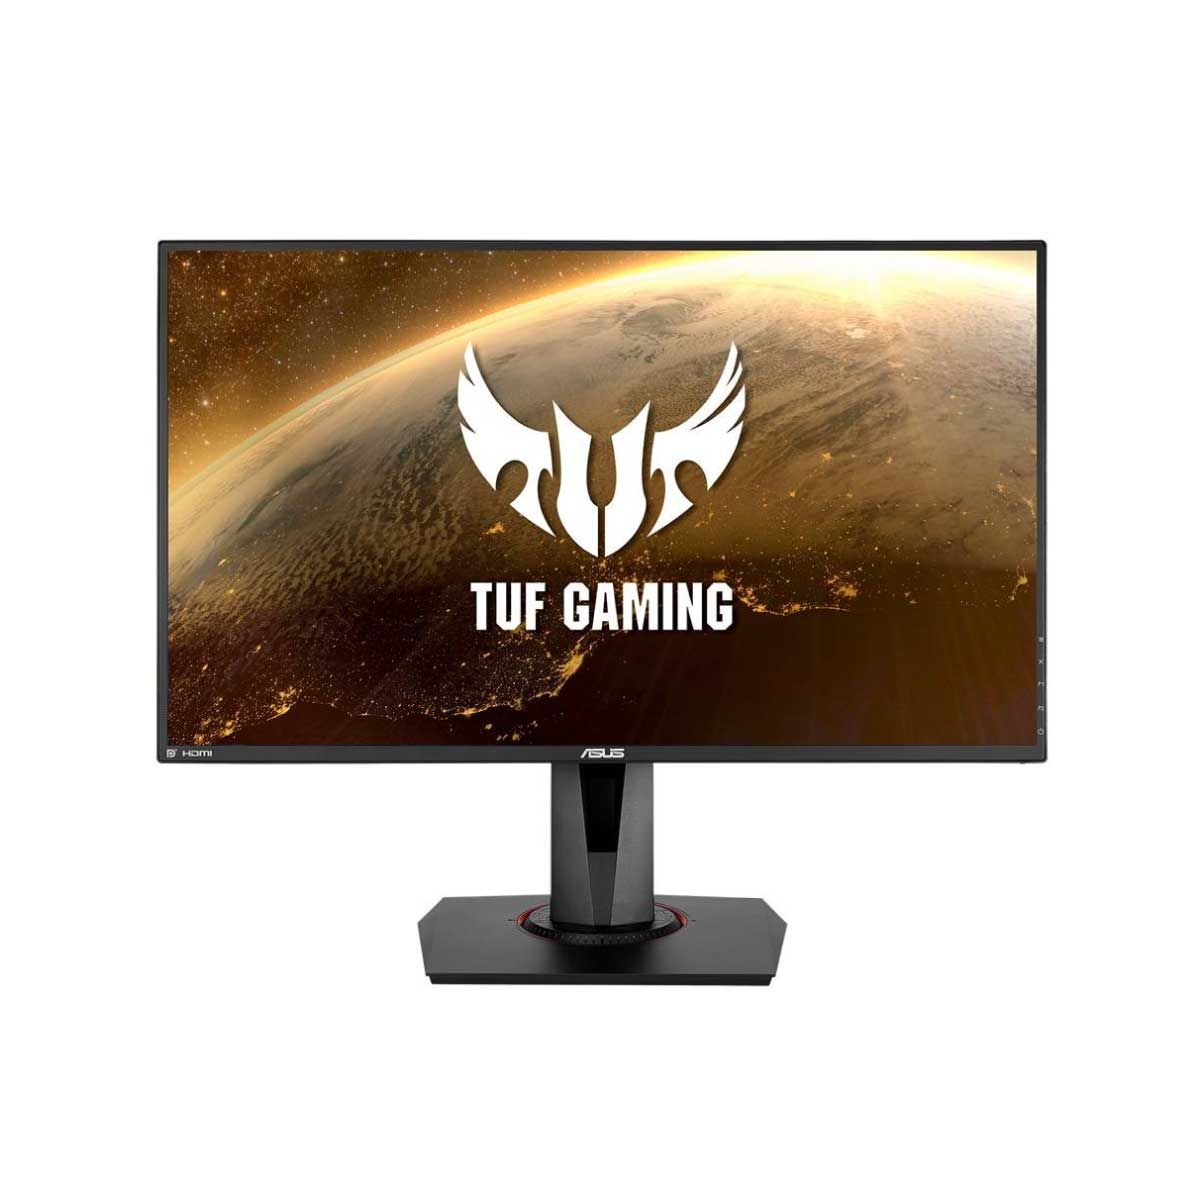 MONITOR (จอมอนิเตอร์) ASUS TUF GAMING VG279QM - 27" IPS FHD 280Hz G-SYNC COMPATIBLE